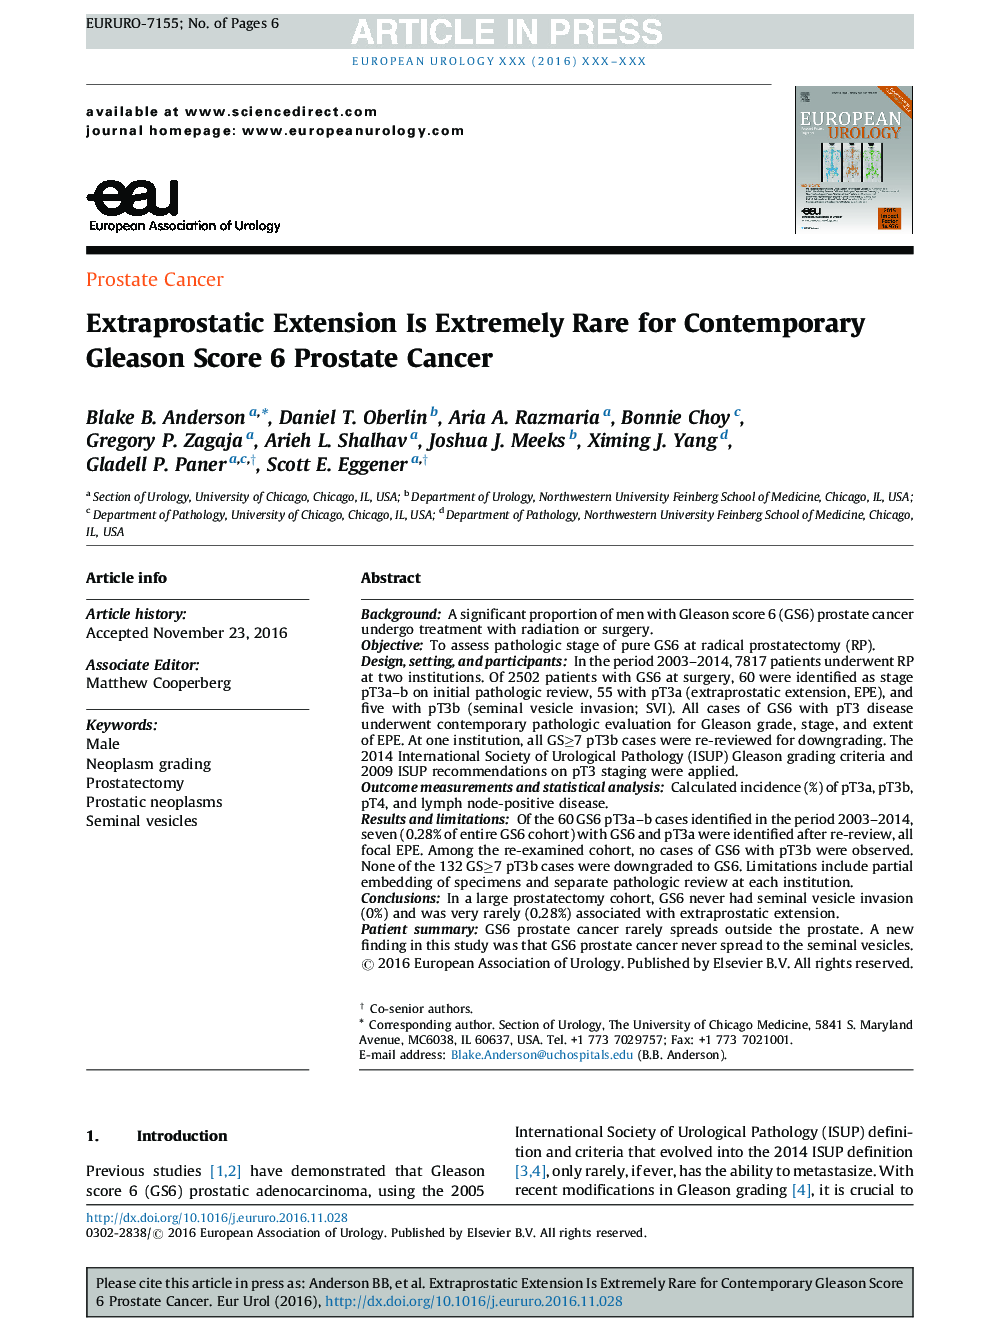 Extraprostatic Extension Is Extremely Rare for Contemporary Gleason Score 6 Prostate Cancer